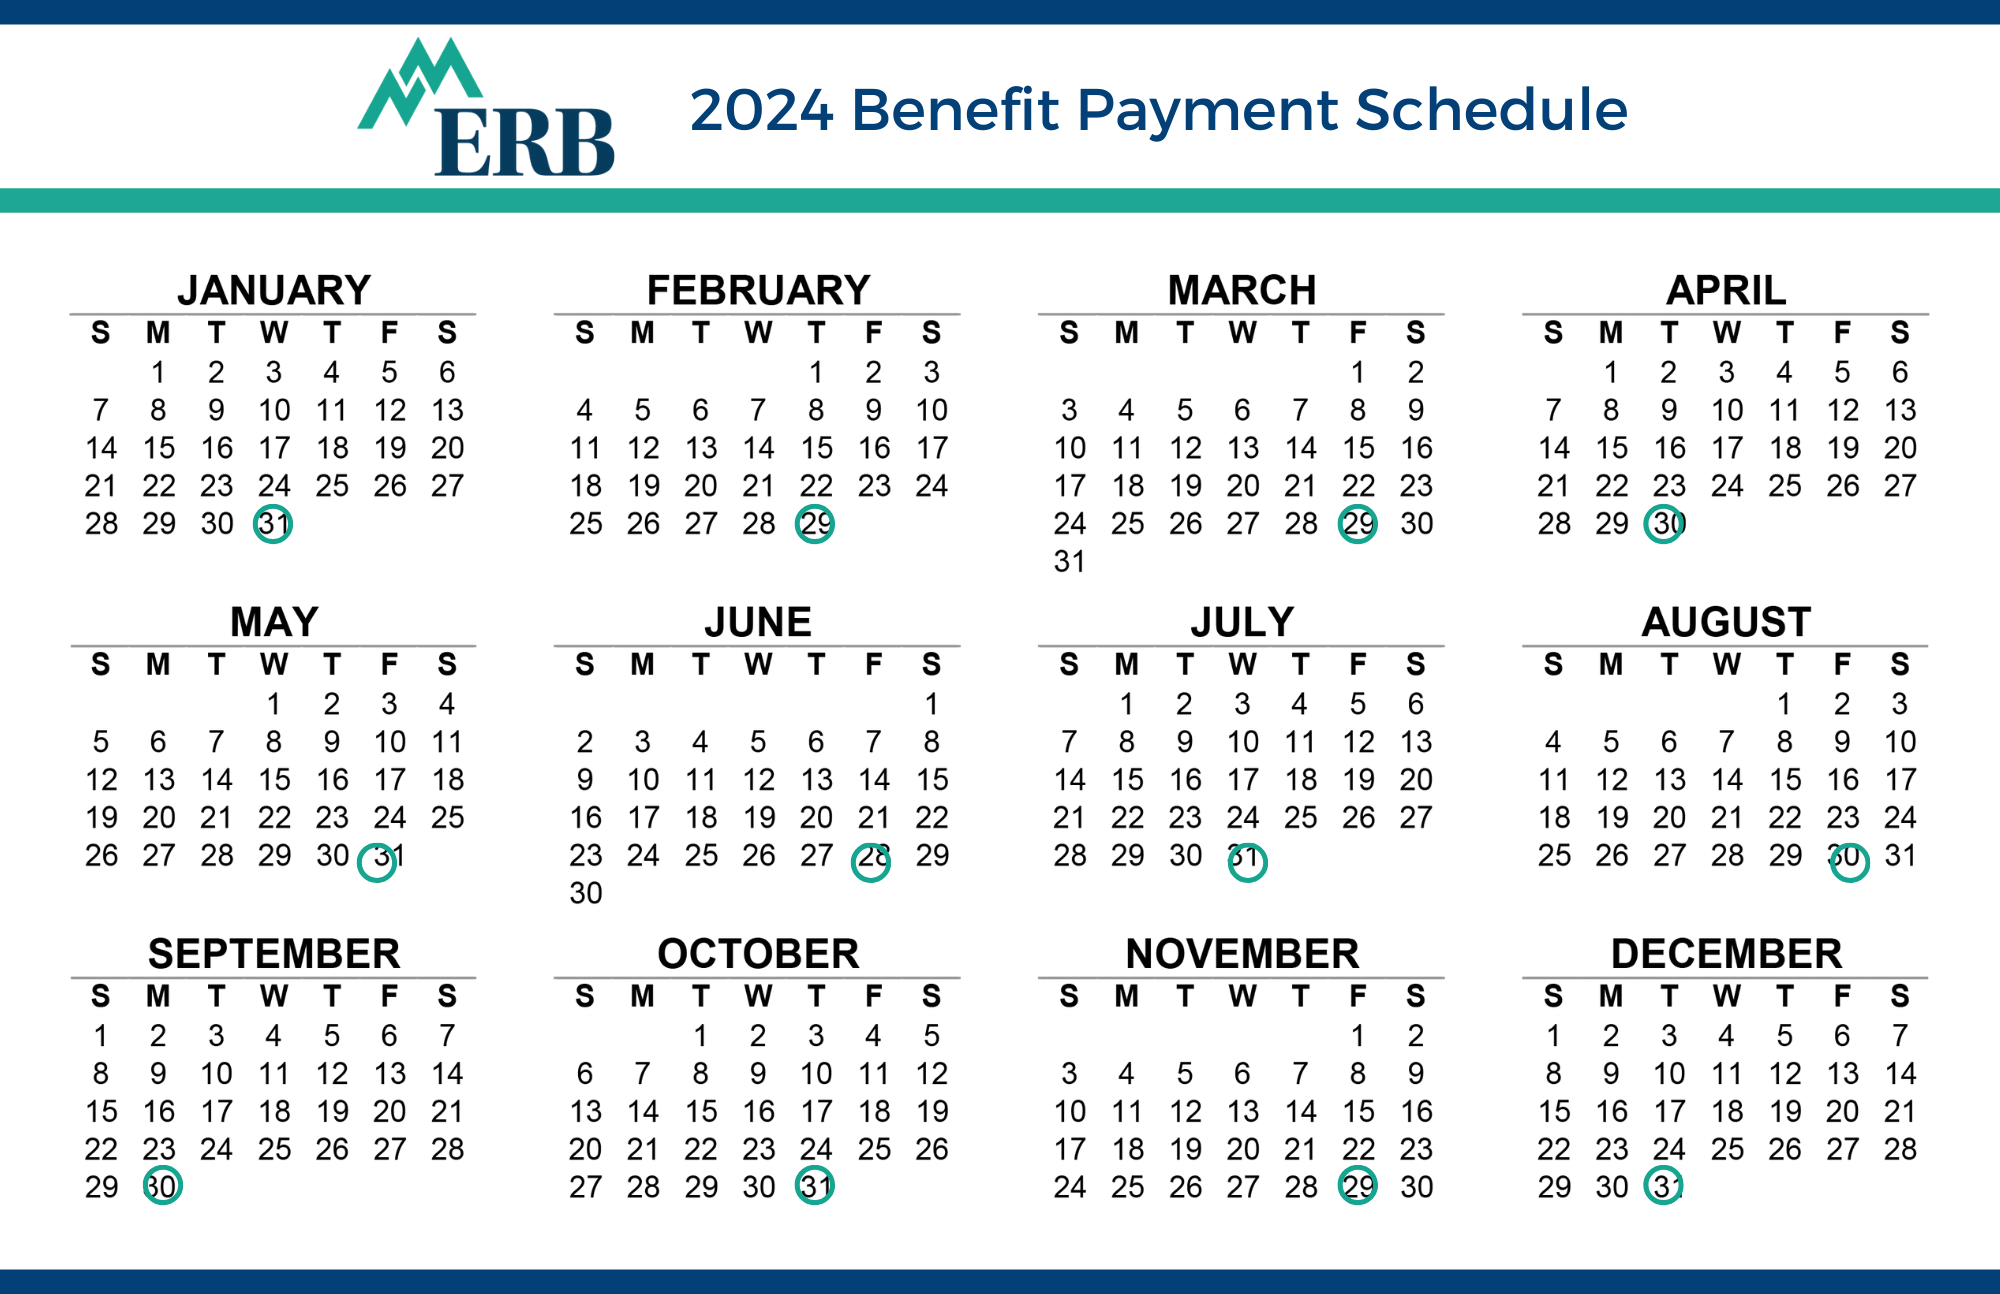 2024 Benefit Payment Schedule as indicated on the image:<br />
January 31<br />
February 29<br />
March 29<br />
April 30<br />
May 31<br />
June 28<br />
July 31<br />
August 30<br />
September 30<br />
October 31<br />
November 29<br />
December 31